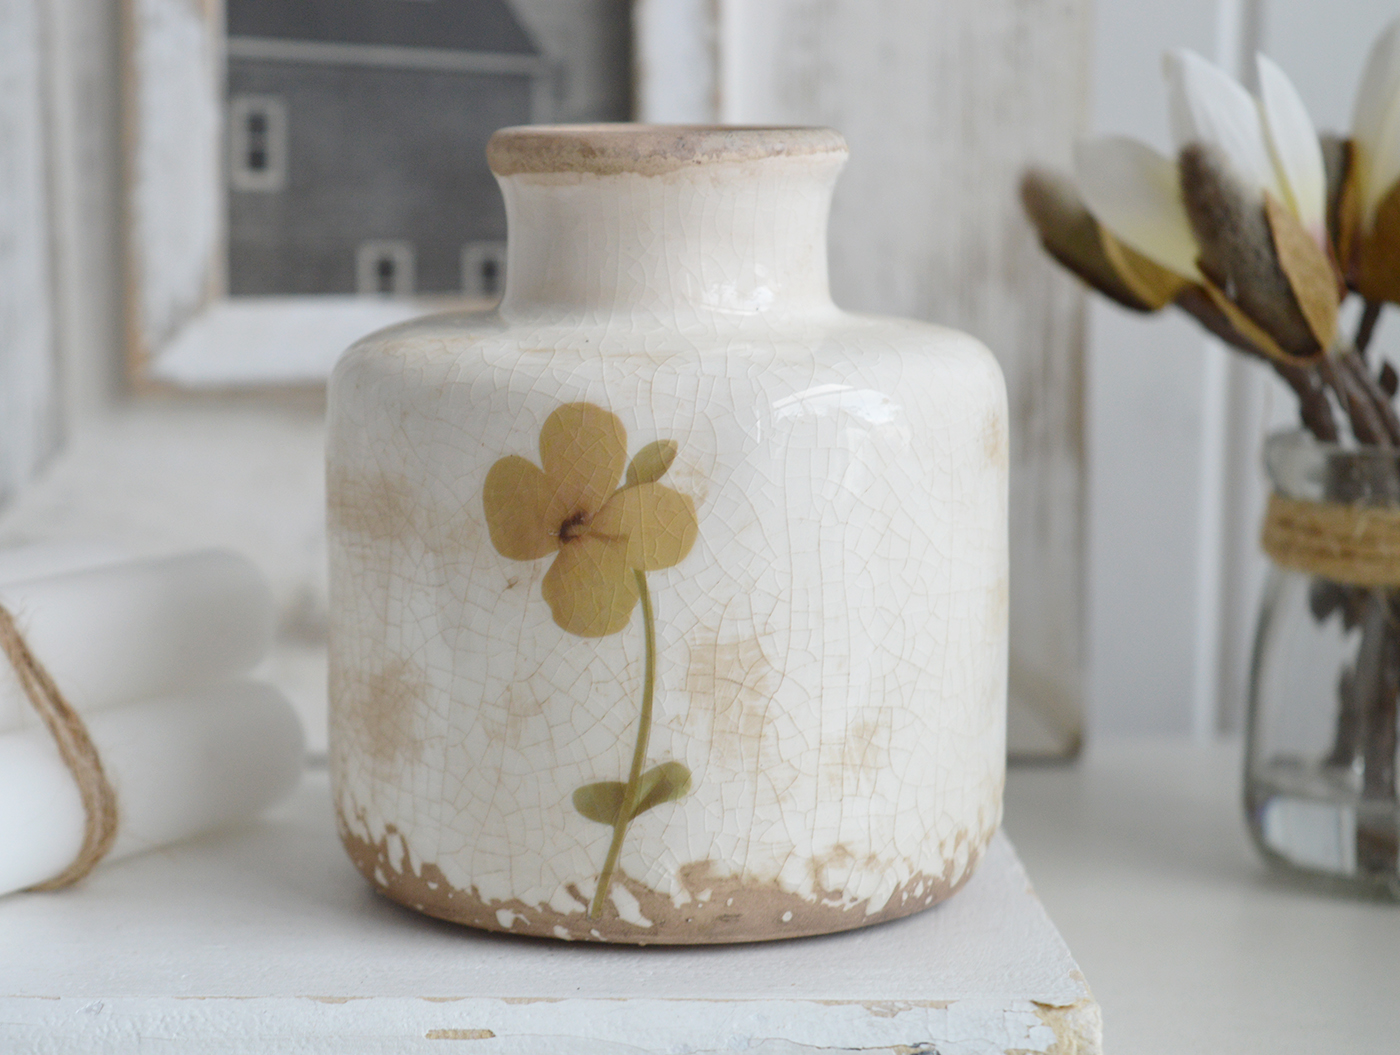 Charlotte vase with a crackled glazed finish  with simple floral design for New England, Country and coastal home interior decor